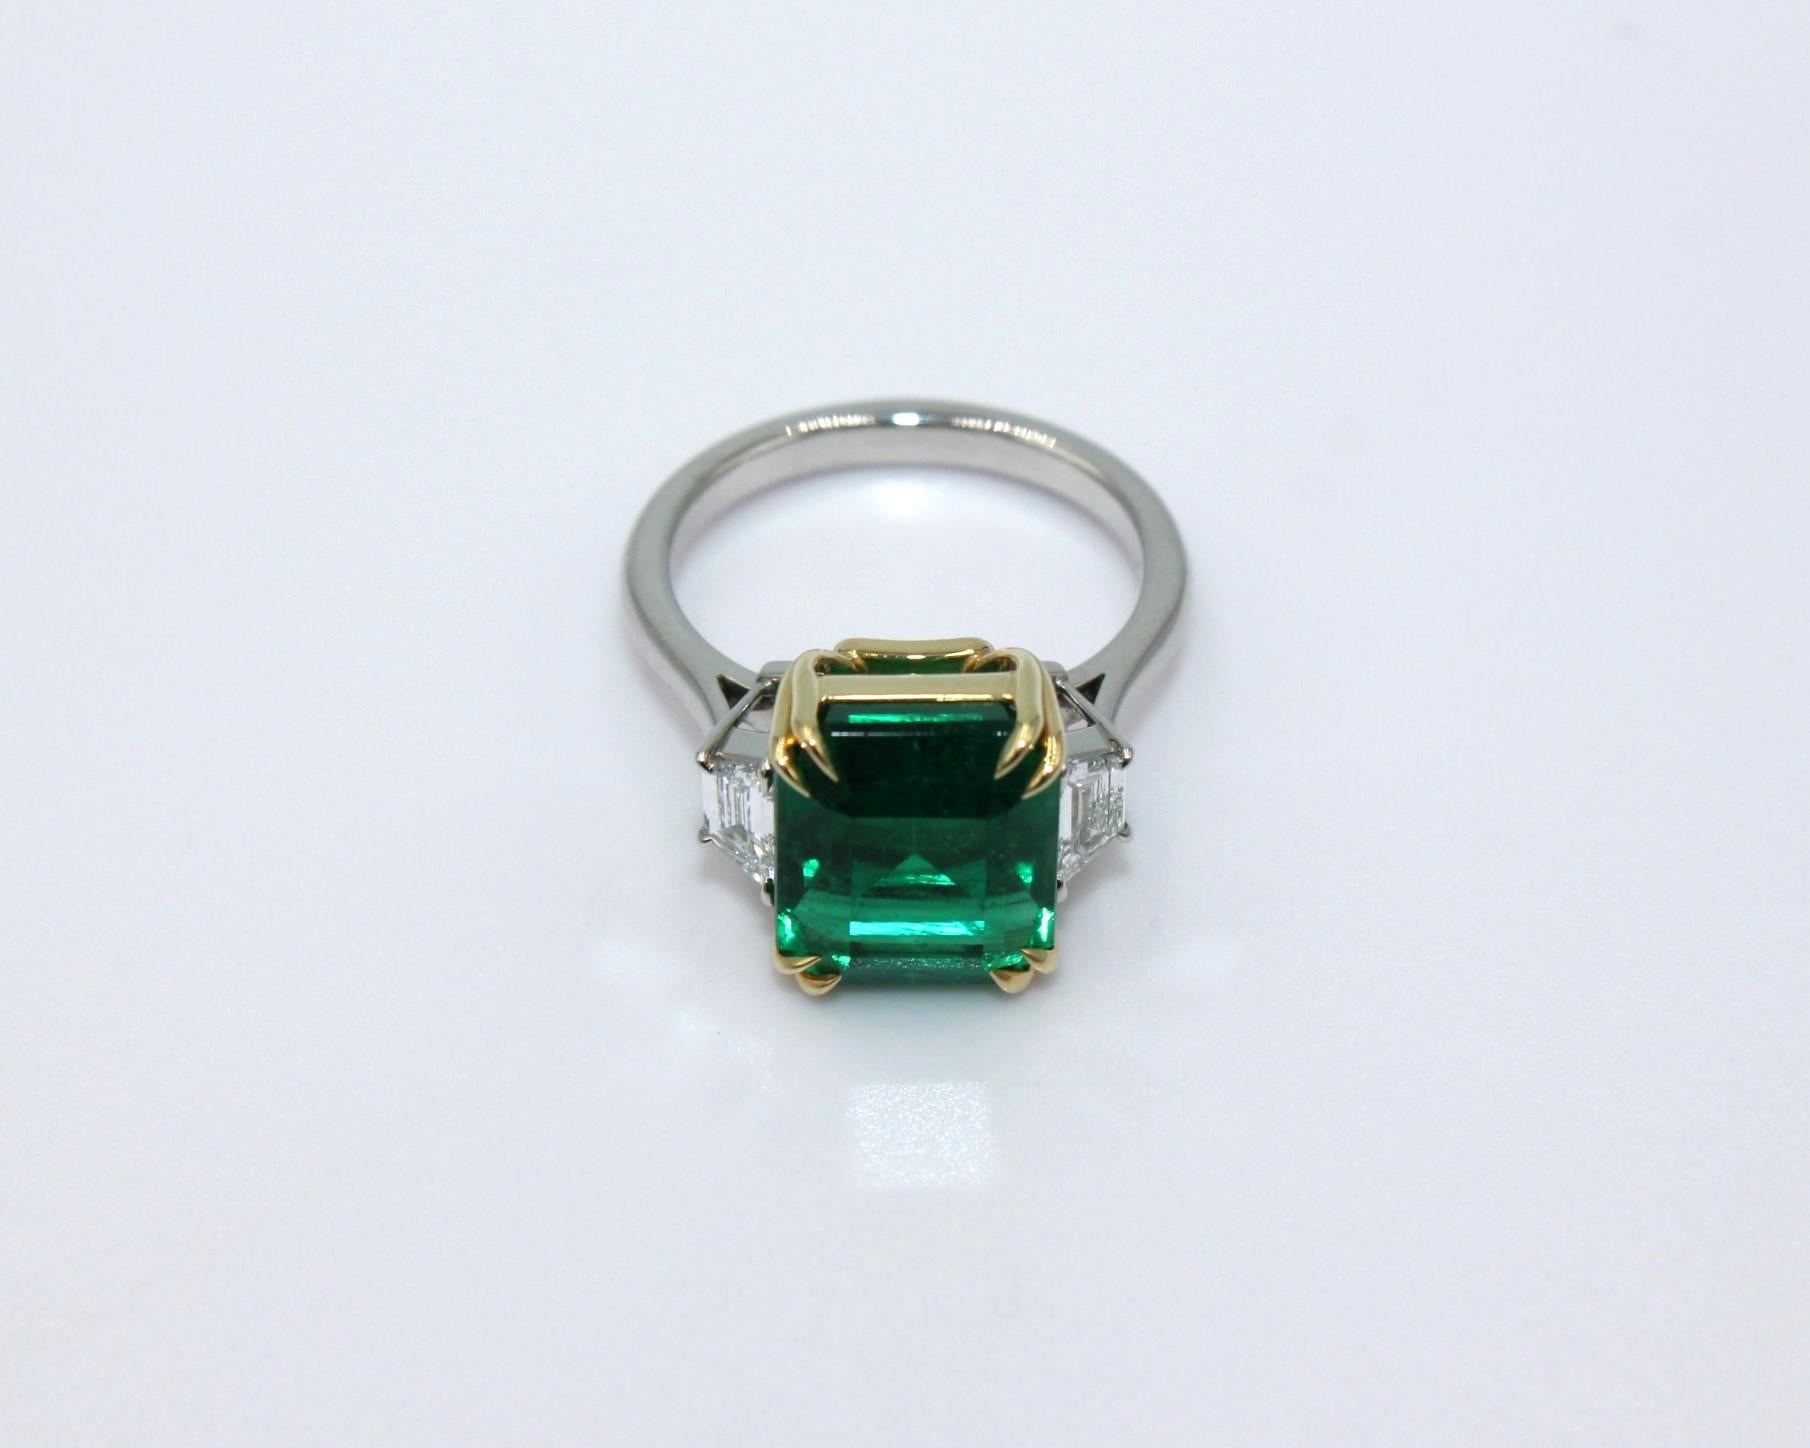 6.16 carat emerald-cut Zambian Emerald with 2 trapezoid shaped diamonds, totaling a diamond weight of 0.48 carat. 

This stunning Emerald Diamond Ring will highlight your elegance and uniqueness. 

Item Details:
- Type: Ring
- Metal: 18K Gold &